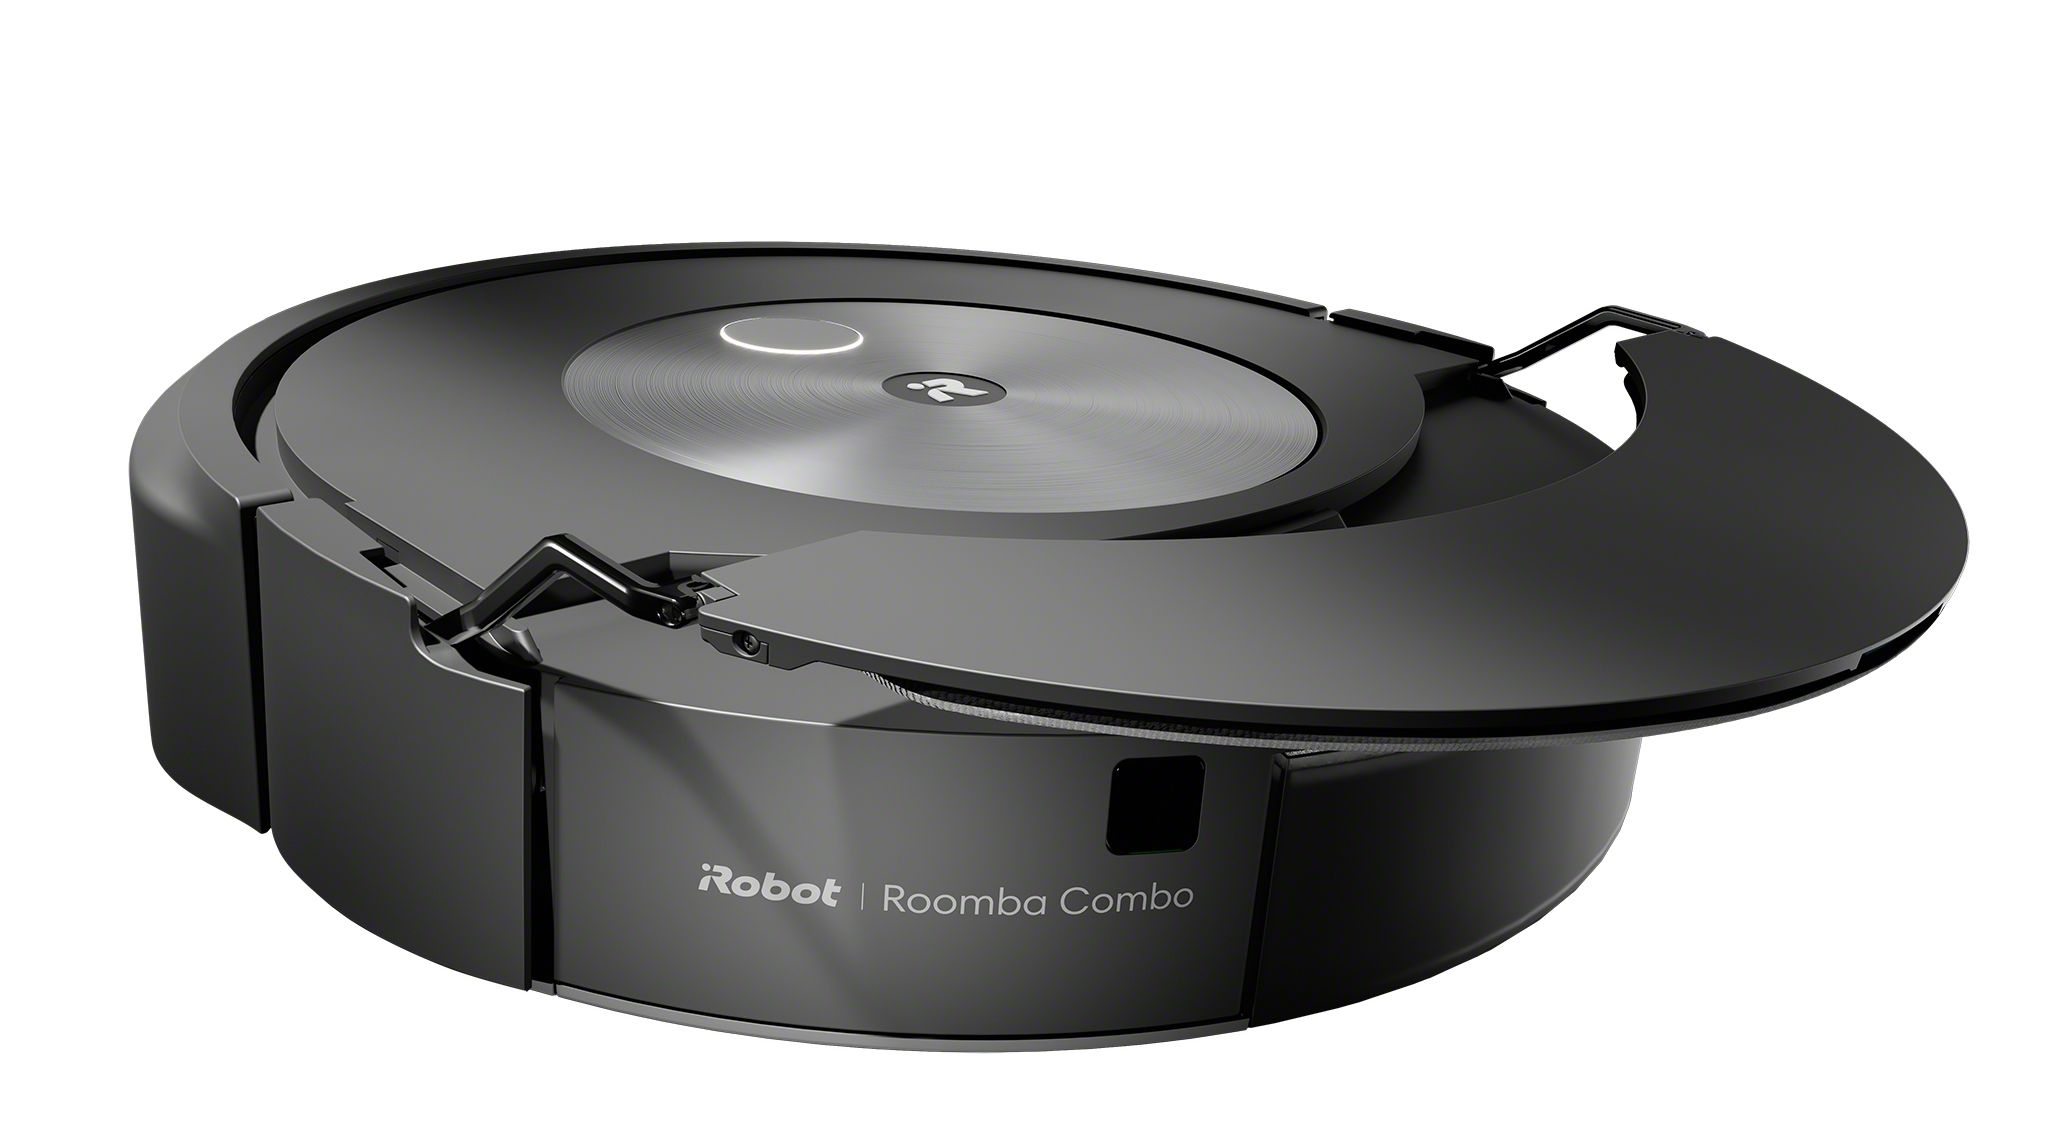 iRobot Introduces Its First Vacuum and Mop Combo, the Roomba Combo j7+